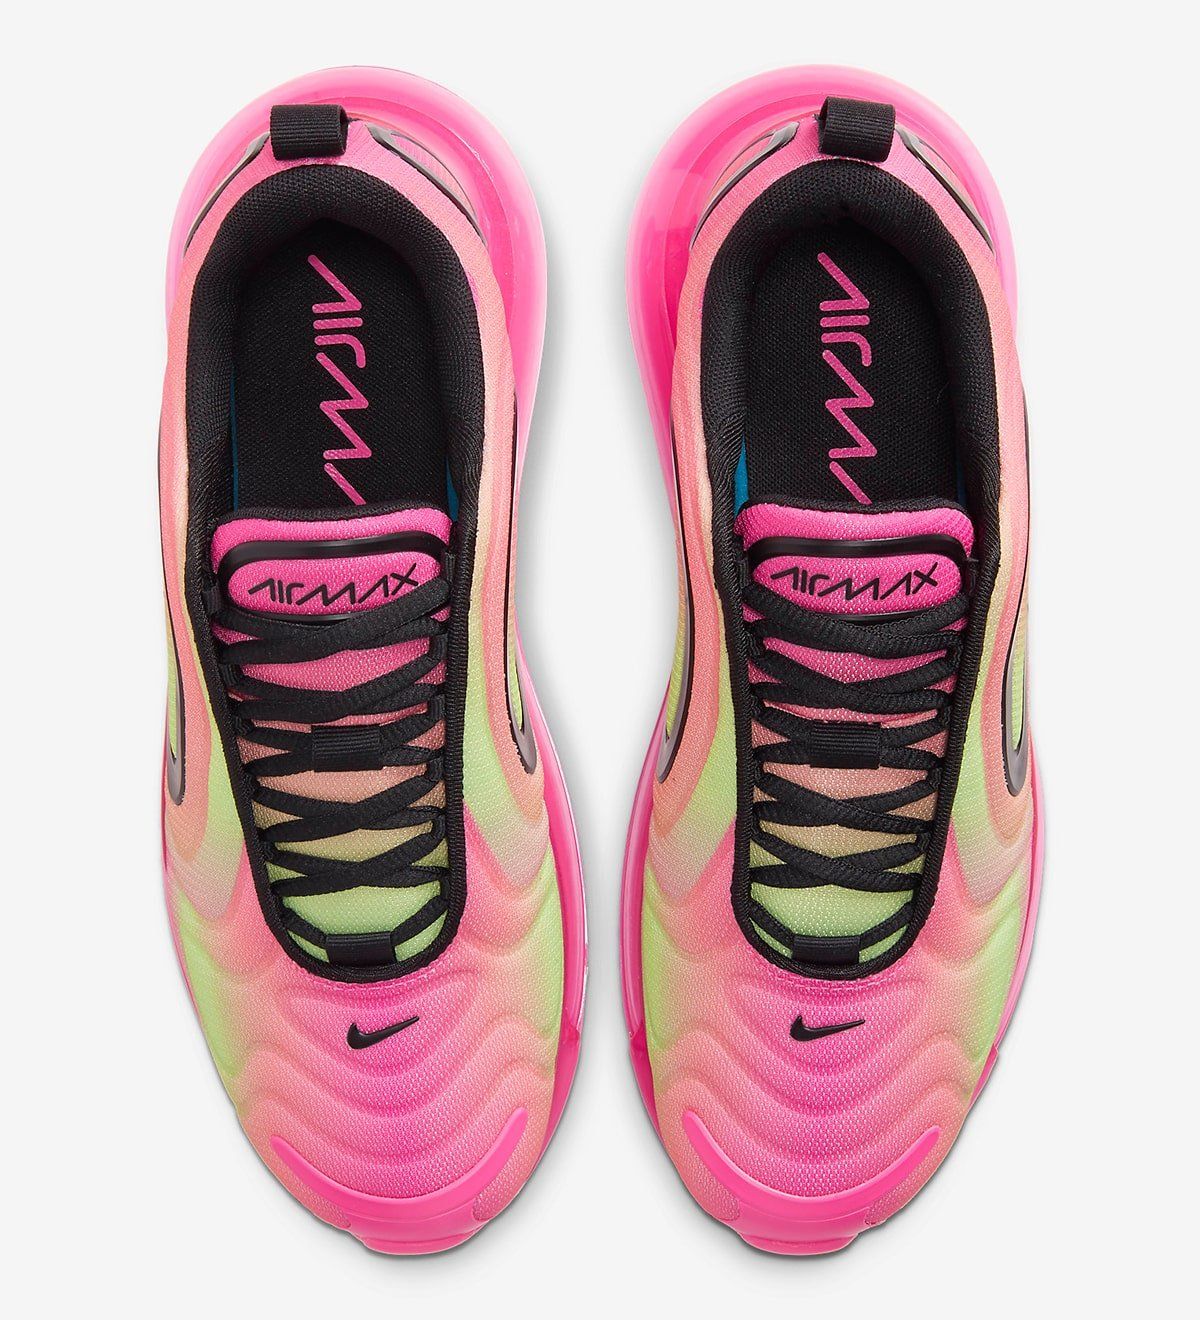 then Endure baggage Nike Air Max 720 "Candy Pink" is Coming Soon | HOUSE OF HEAT